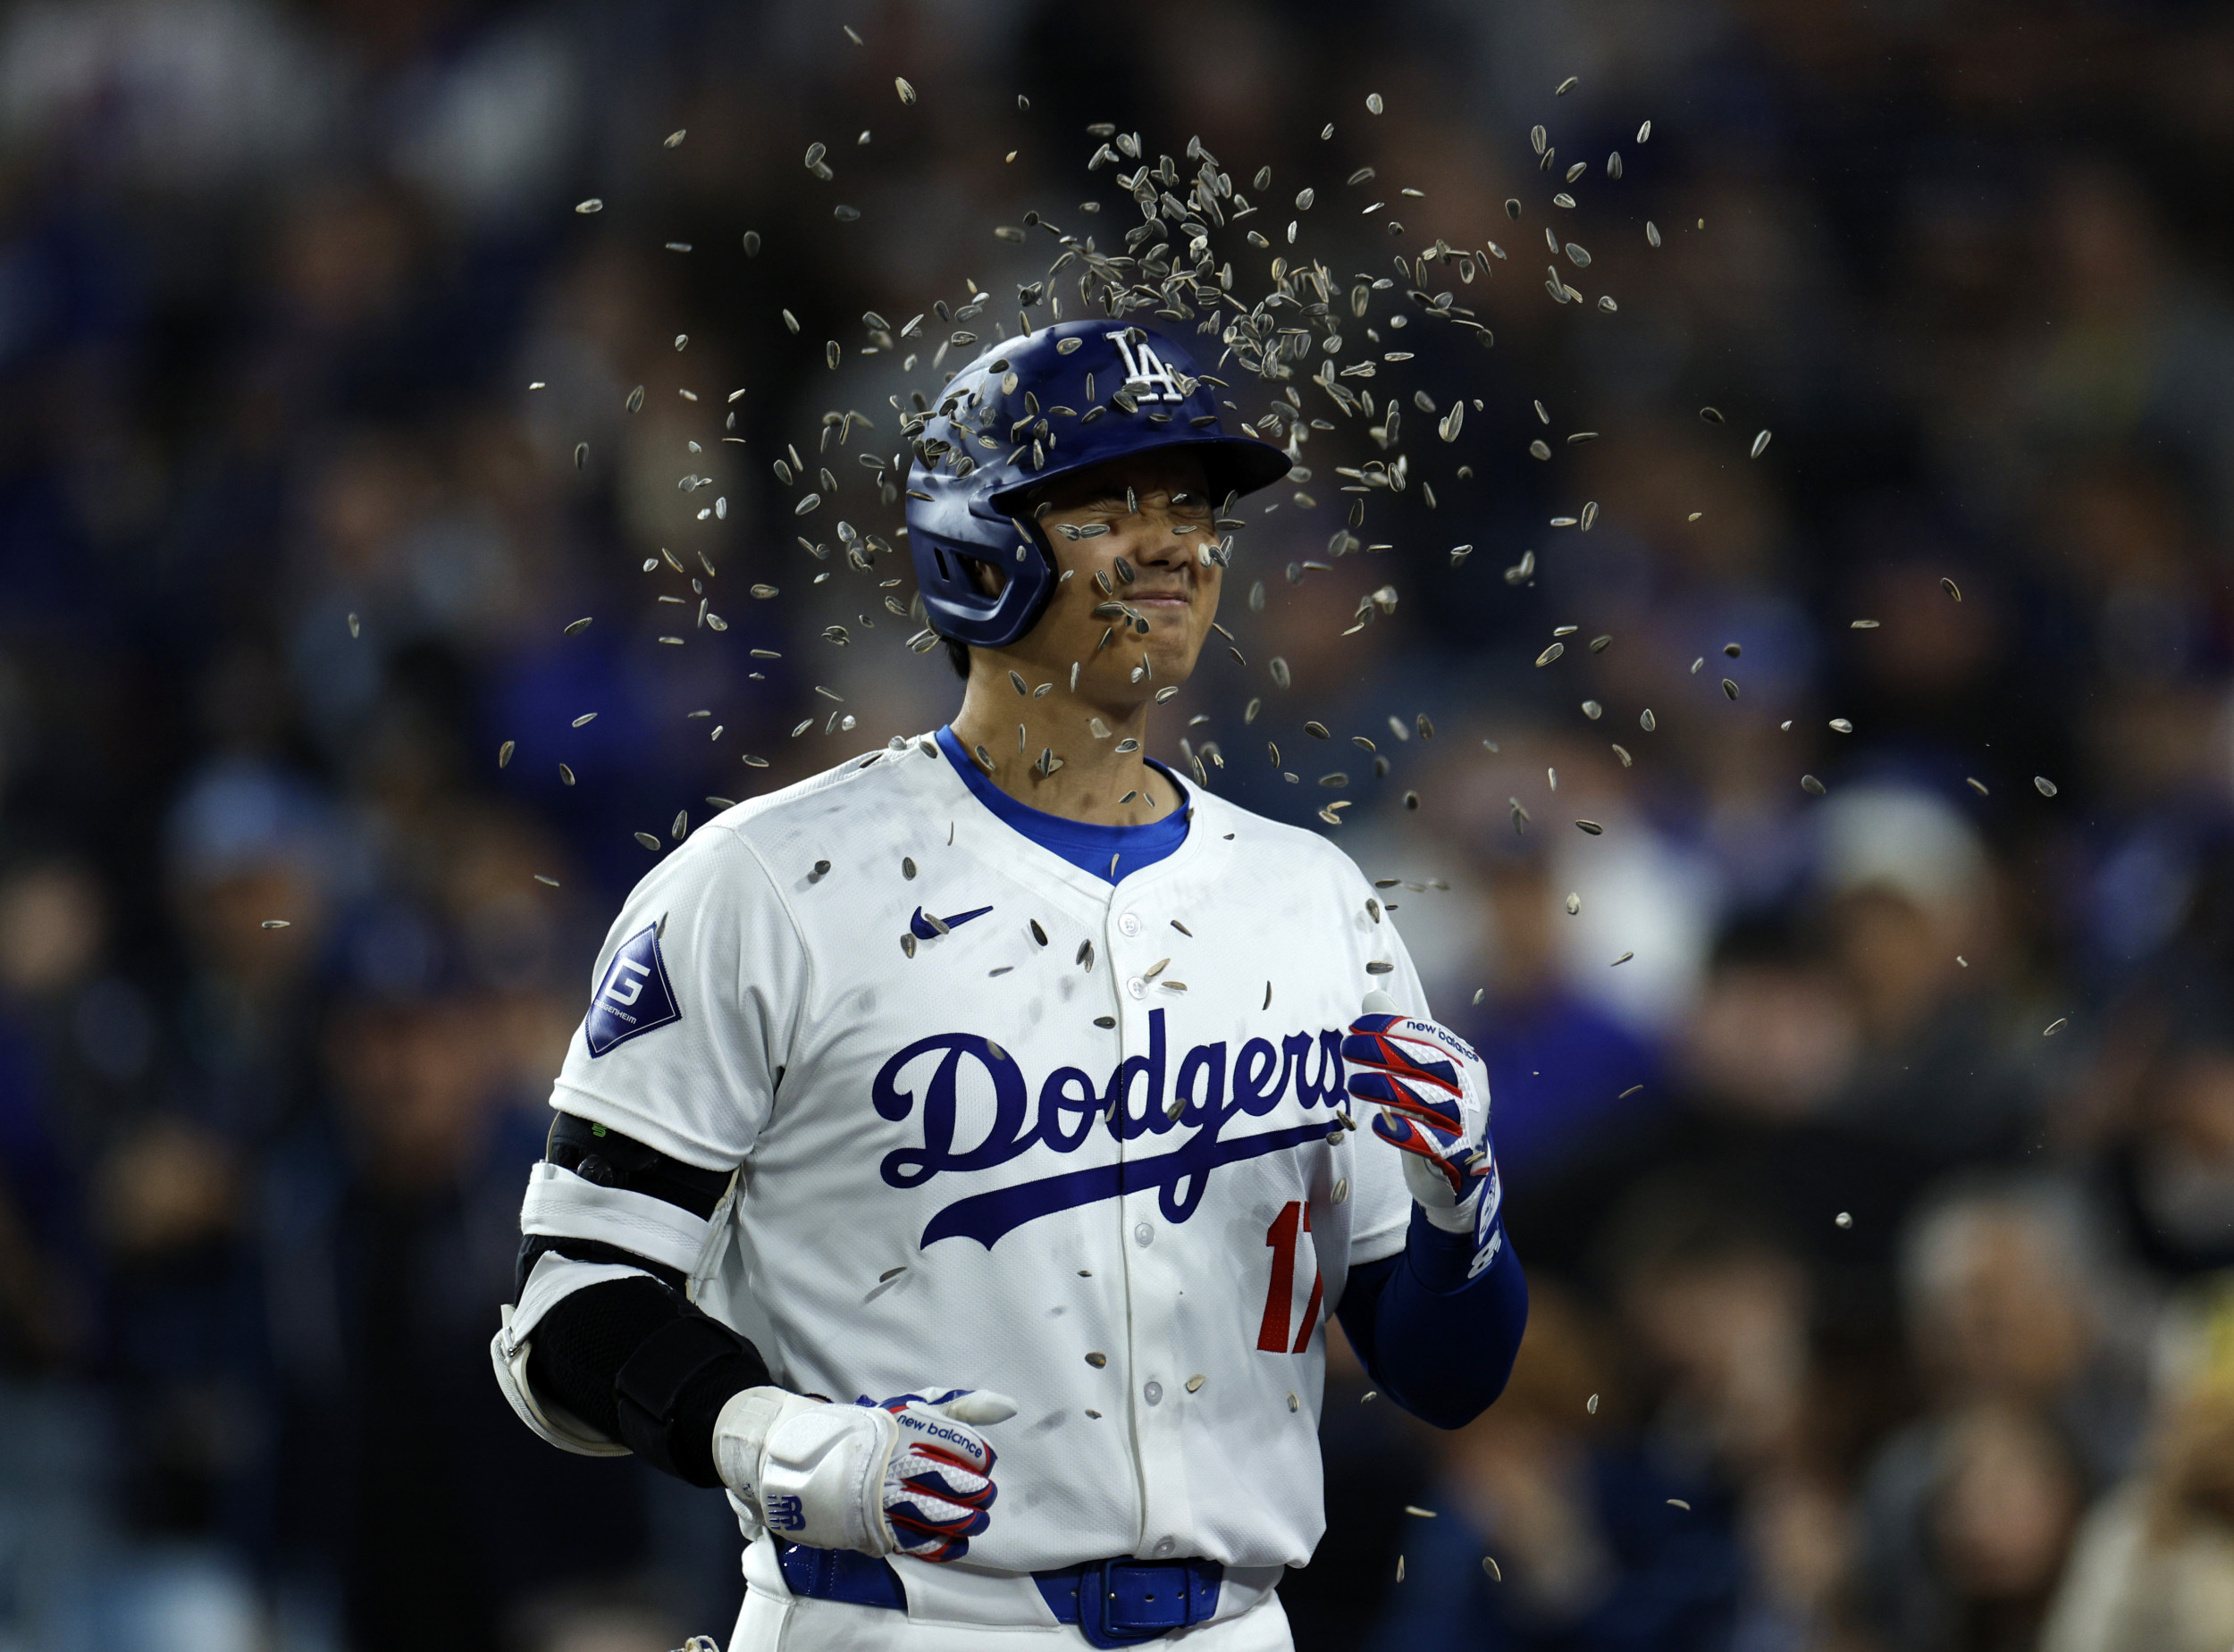 Dodgers to Review Process in Response to Uproar Over Ohtani Home Run Ball